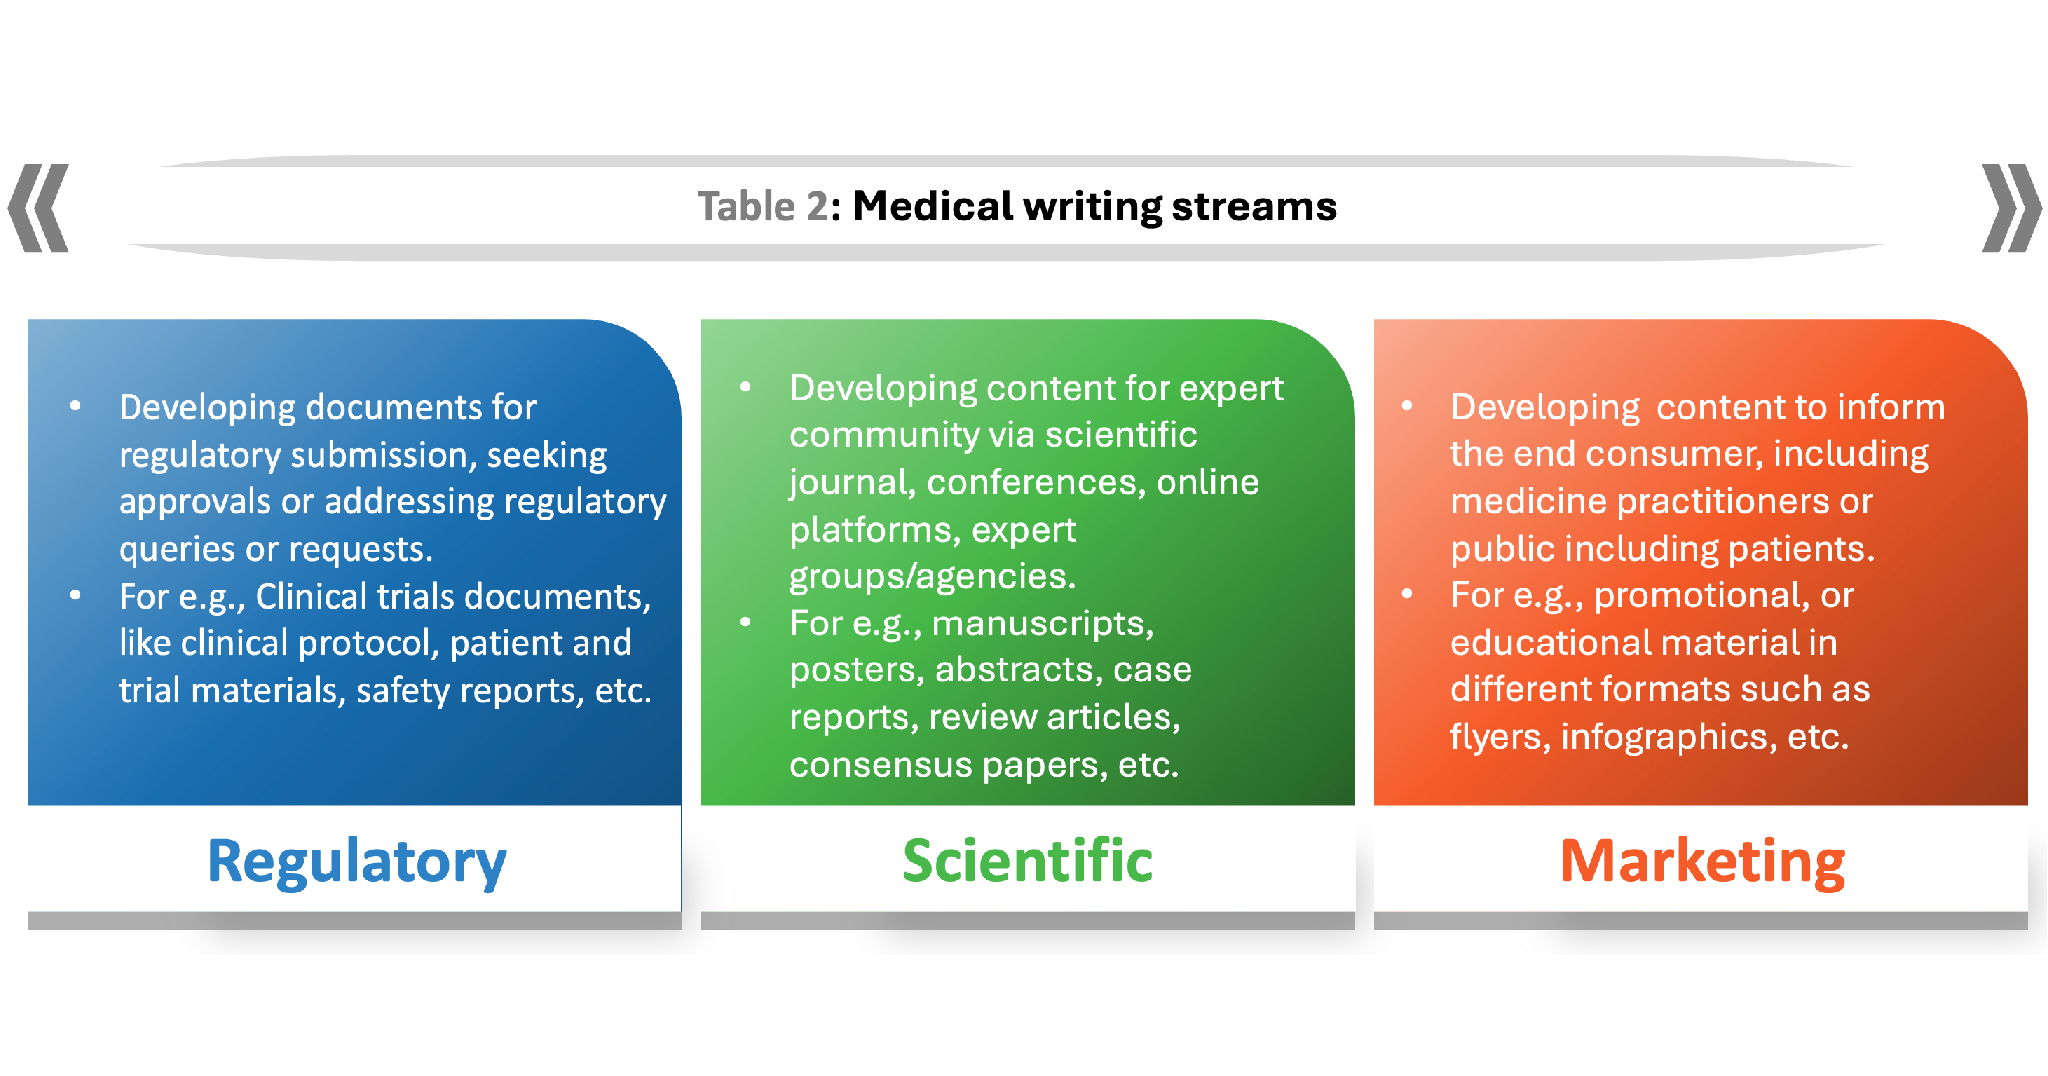 Regulatory, scientific publications, and marketing are three broad streams in medical writing